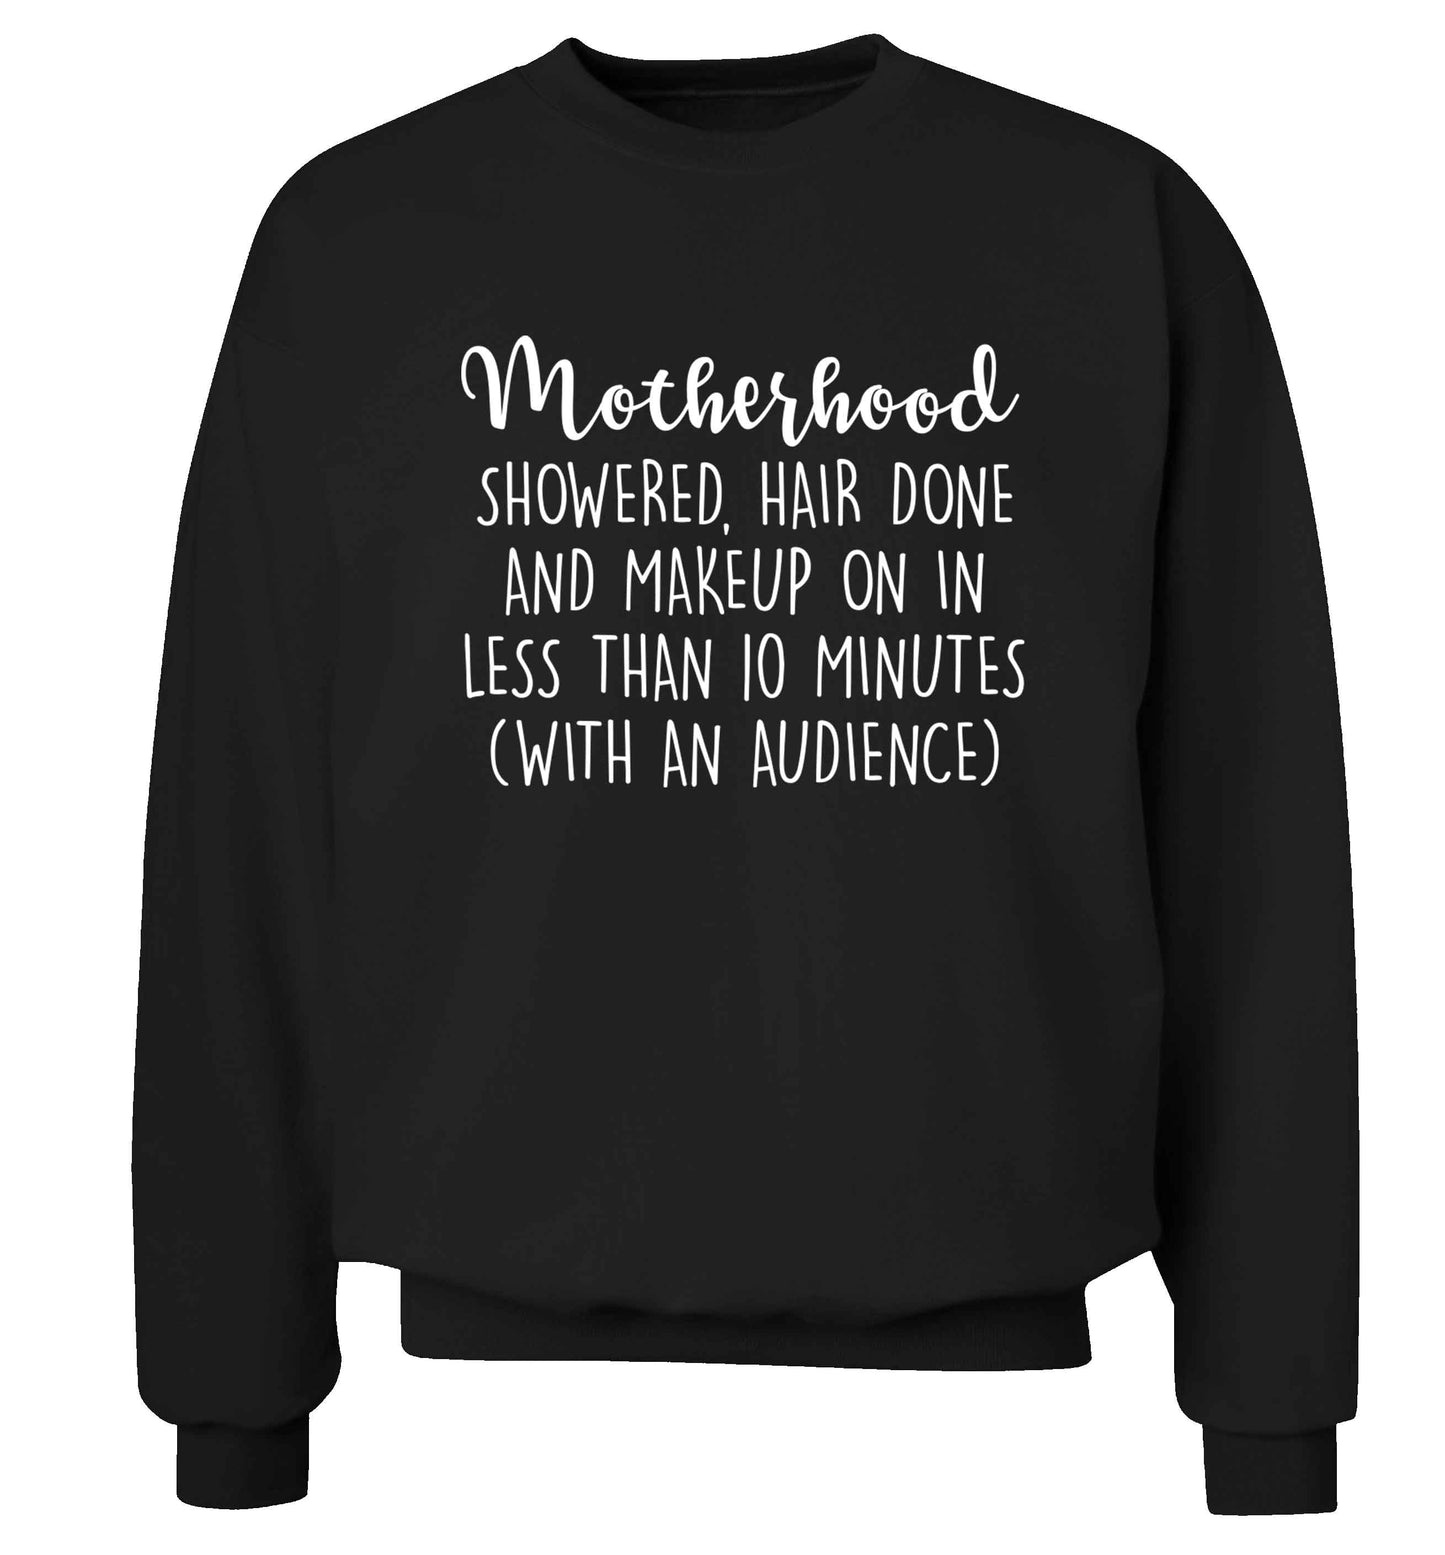 Motherhood, showered, hair done and makeup on Adult's unisex black Sweater 2XL